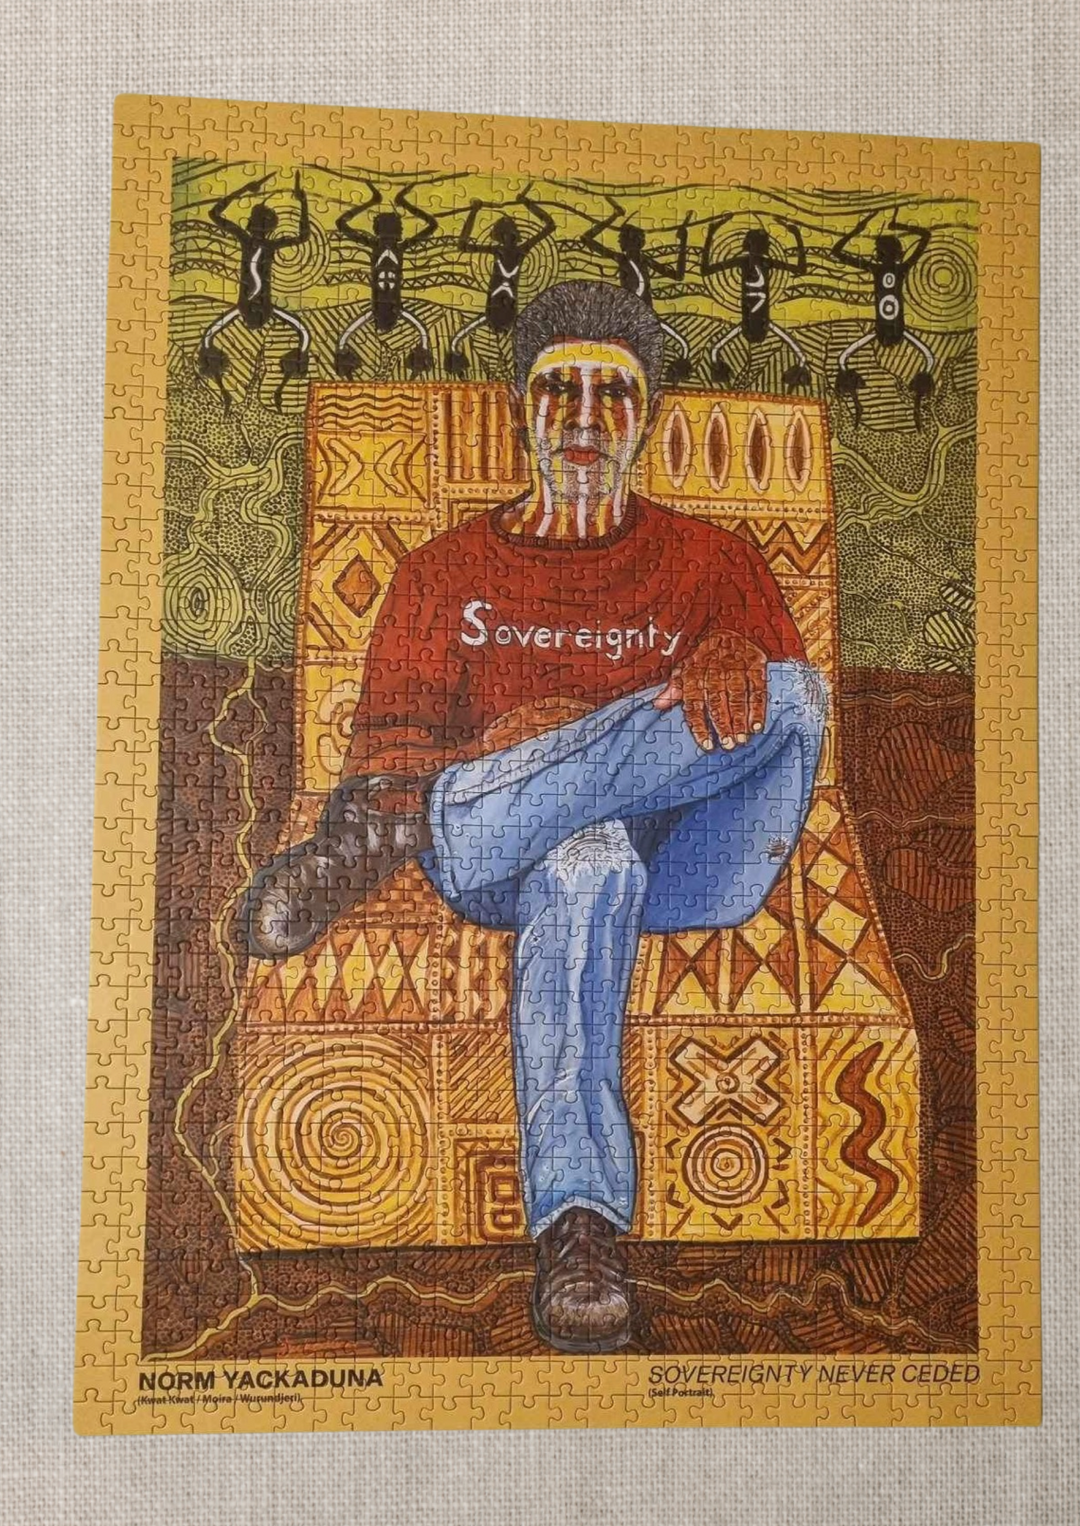 Clothing The Gaps. 1000 piece Puzzle of Aboriginal man with traditional face paint wearing a red sovereignty t-shirt on a yellow possum skin cloak chair. With a brown and green aboriginal style background using dots lines to tell story. Artwork by Norm Yakaduna.